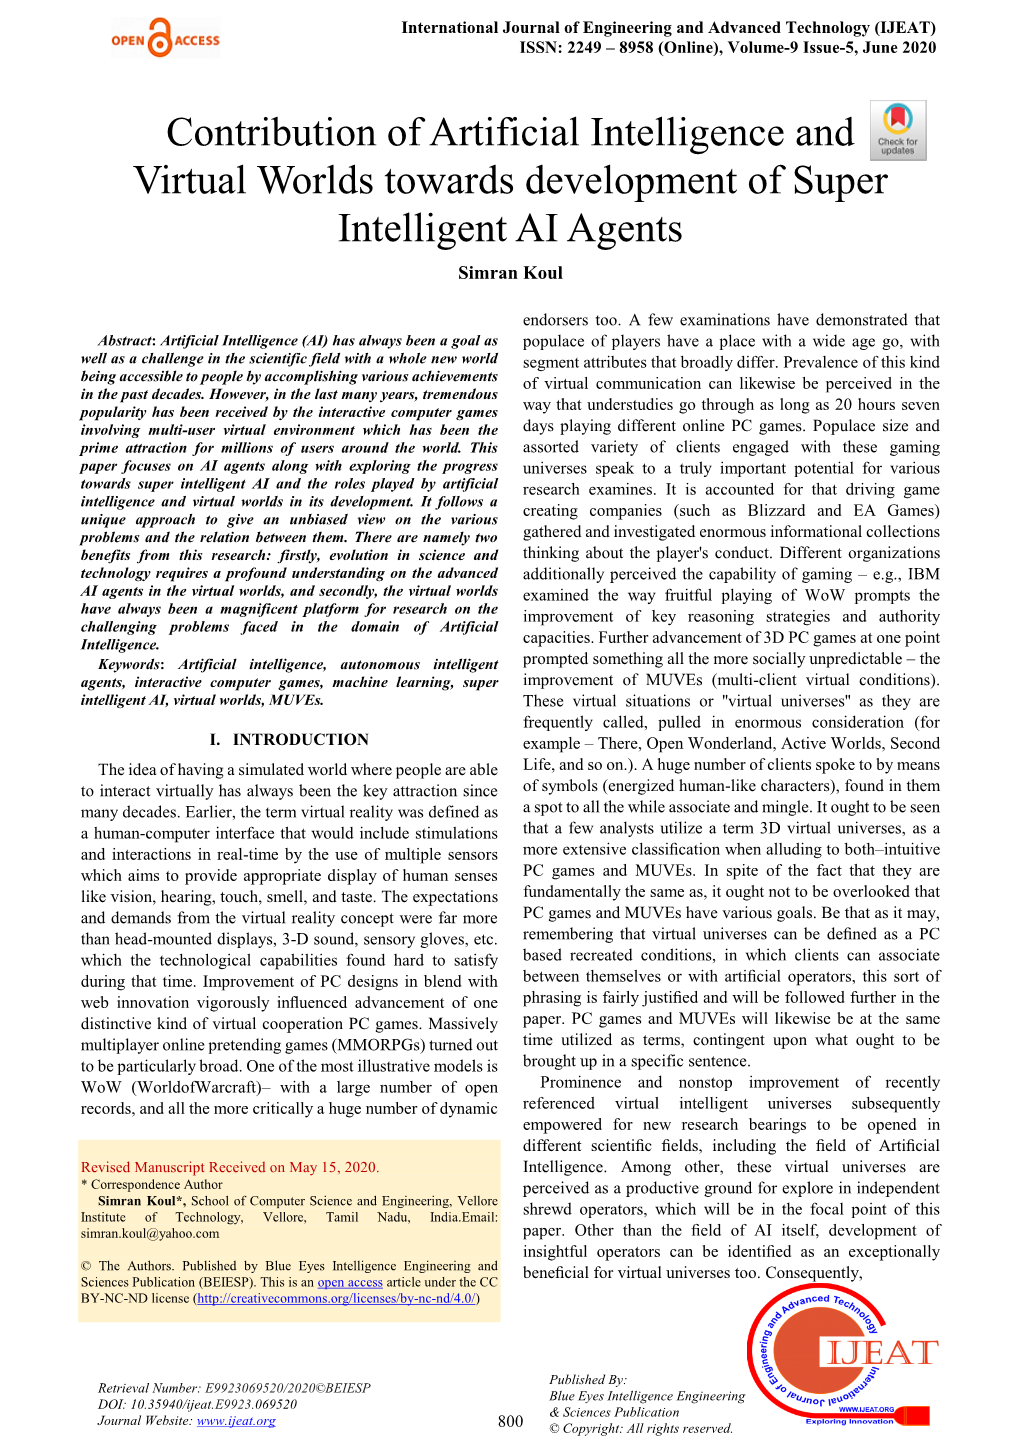 Contribution of Artificial Intelligence and Virtual Worlds Towards Development of Super Intelligent AI Agents Simran Koul